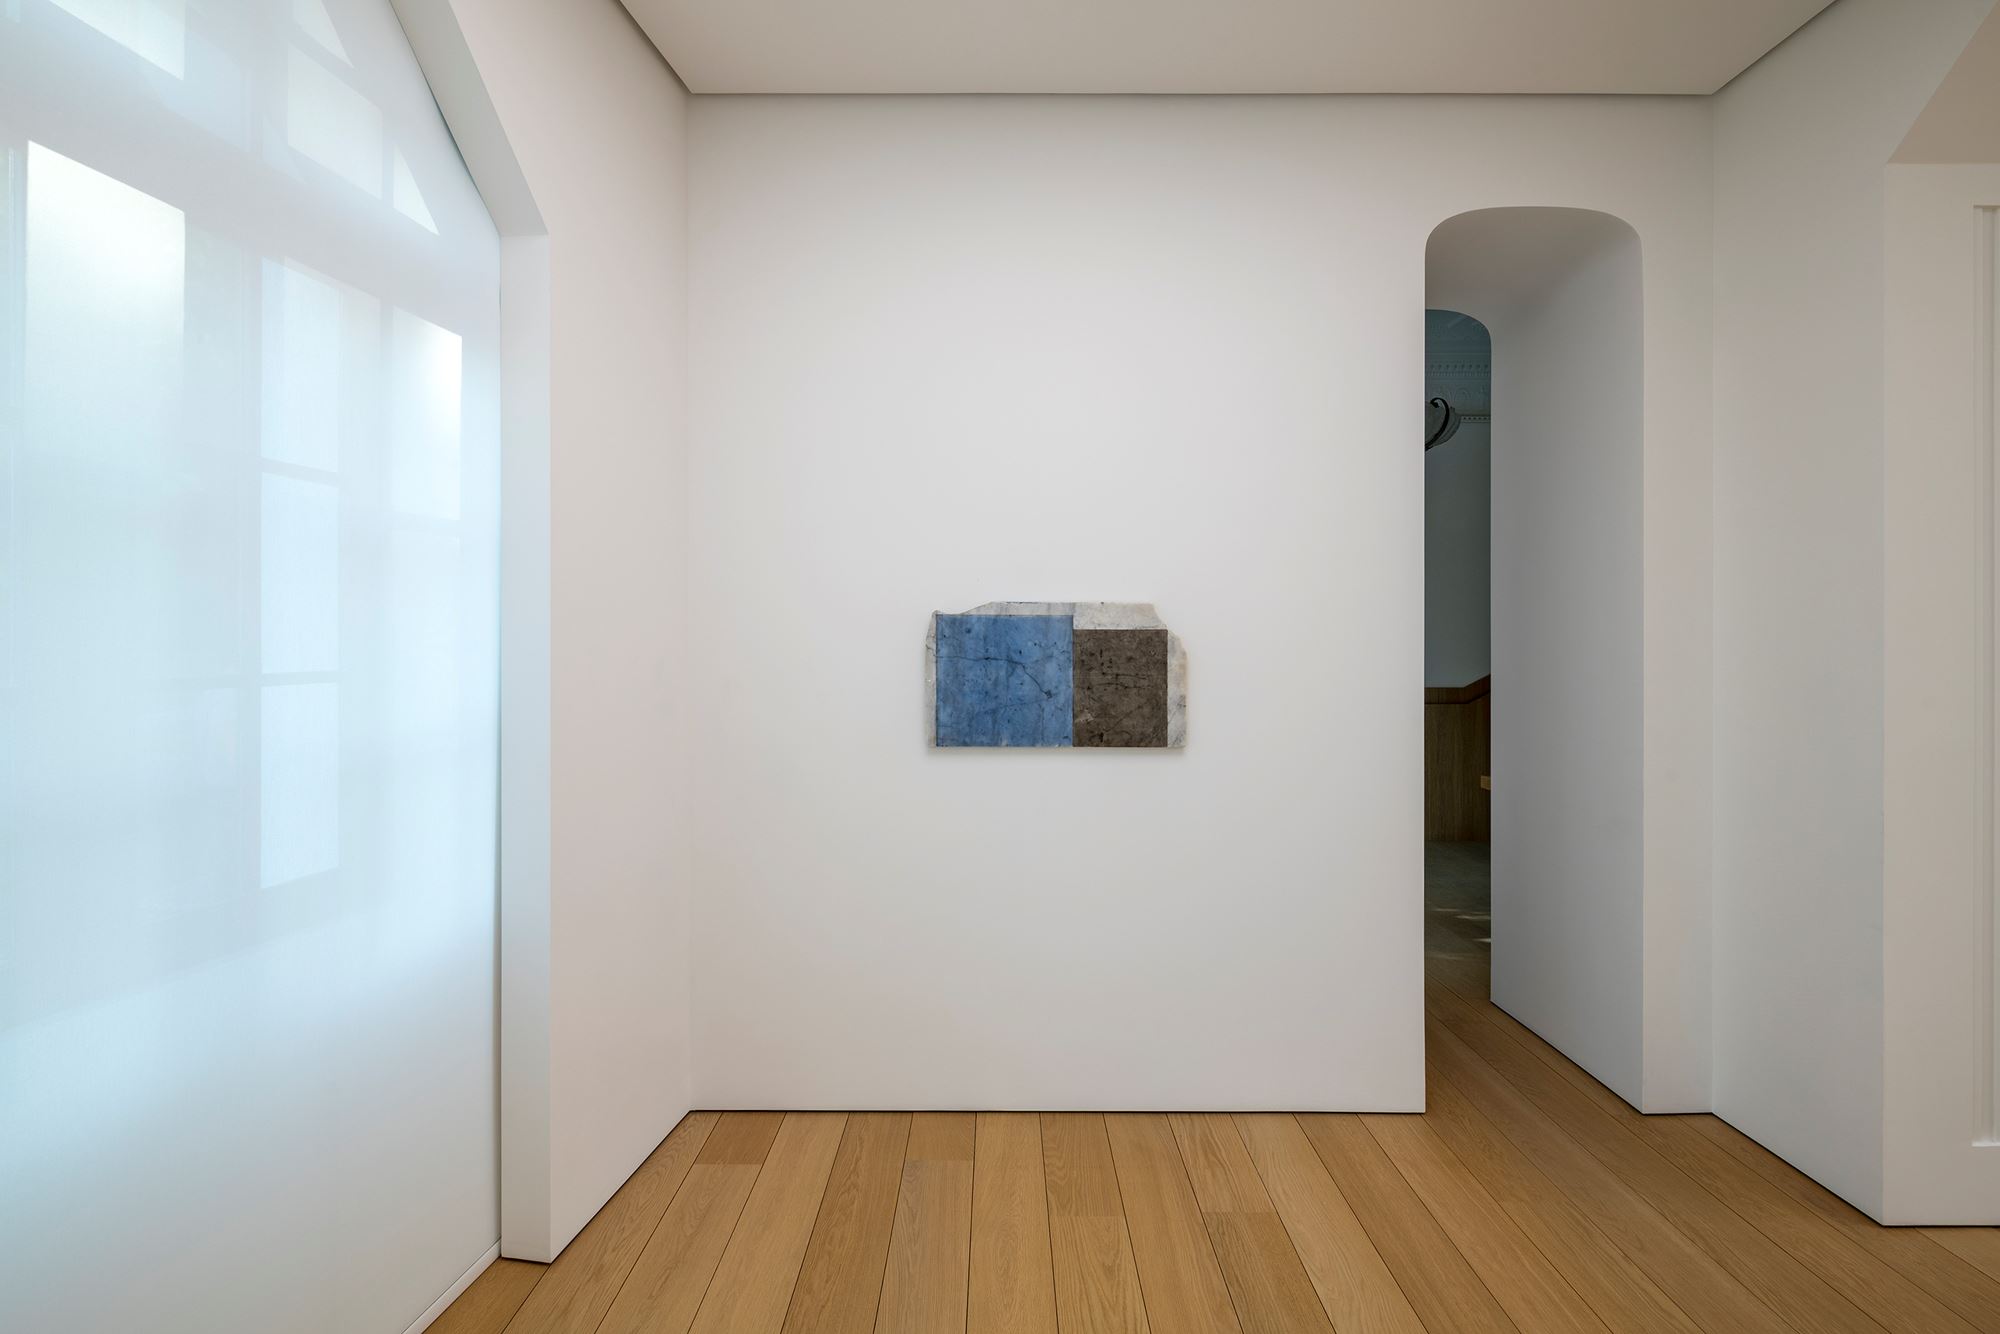 Brice Marden Marbles And Drawings At Osian Merlin Street Athens Greece On 24 Sep 11 Dec 2020 Ocula